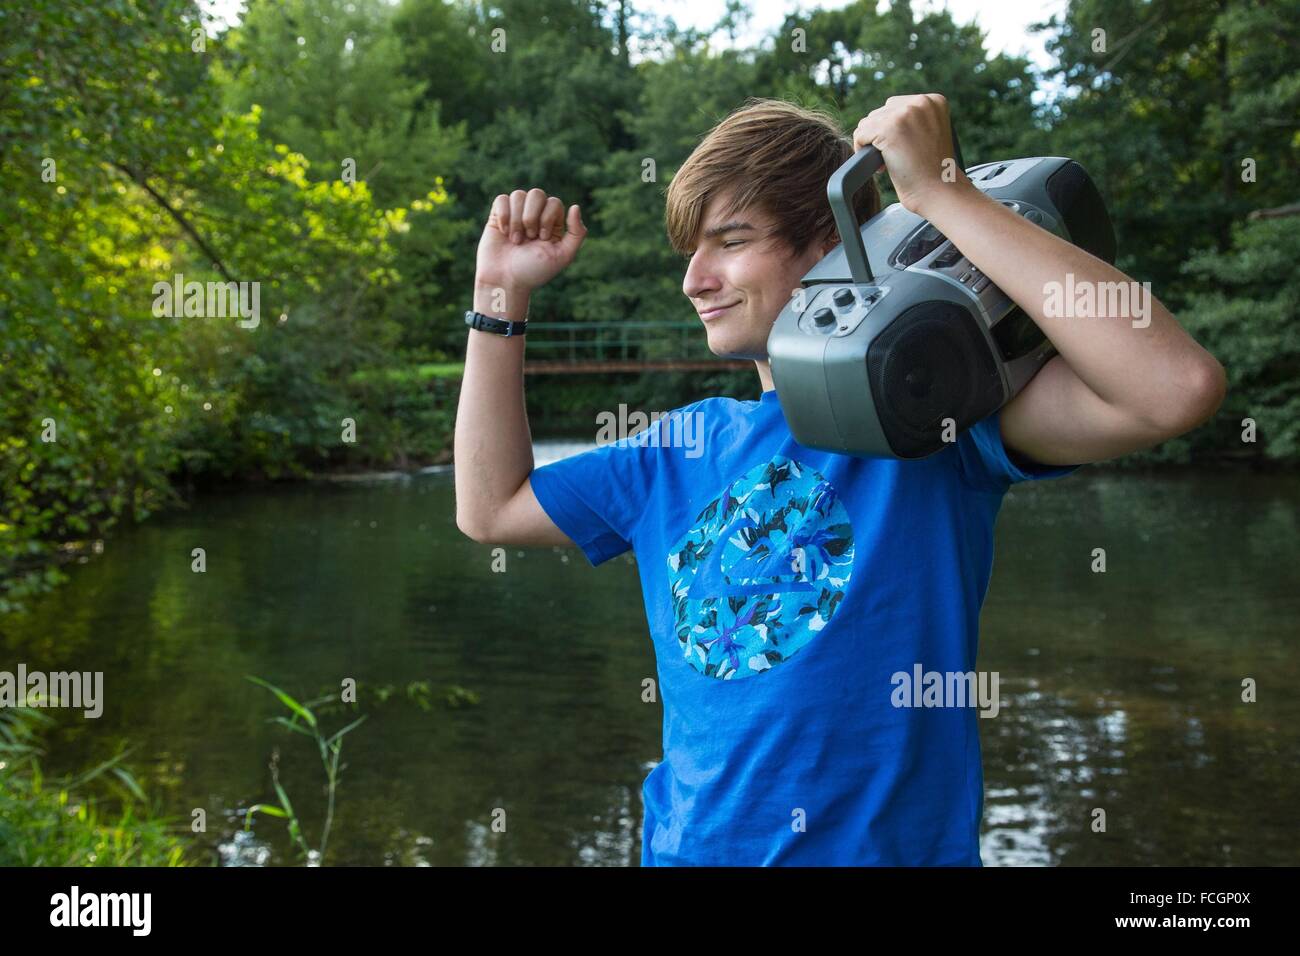 TEENAGER AND MUSIC IN NATURE Stock Photo